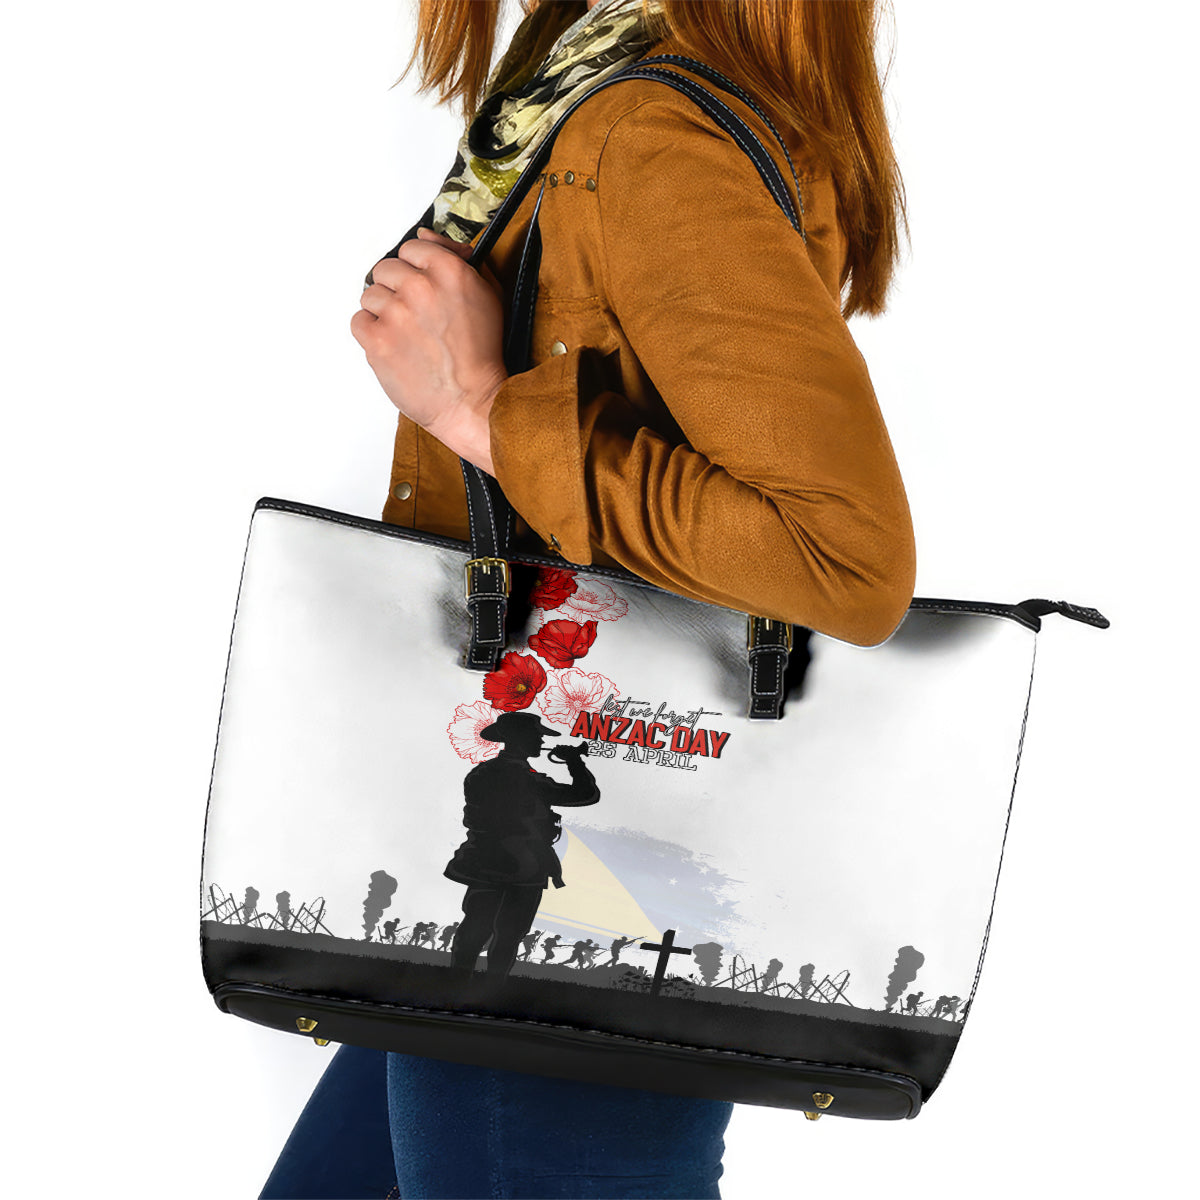 Tokelau ANZAC Day Leather Tote Bag Lest We Forget Red Poppy Flowers and Soldier LT03 White - Polynesian Pride